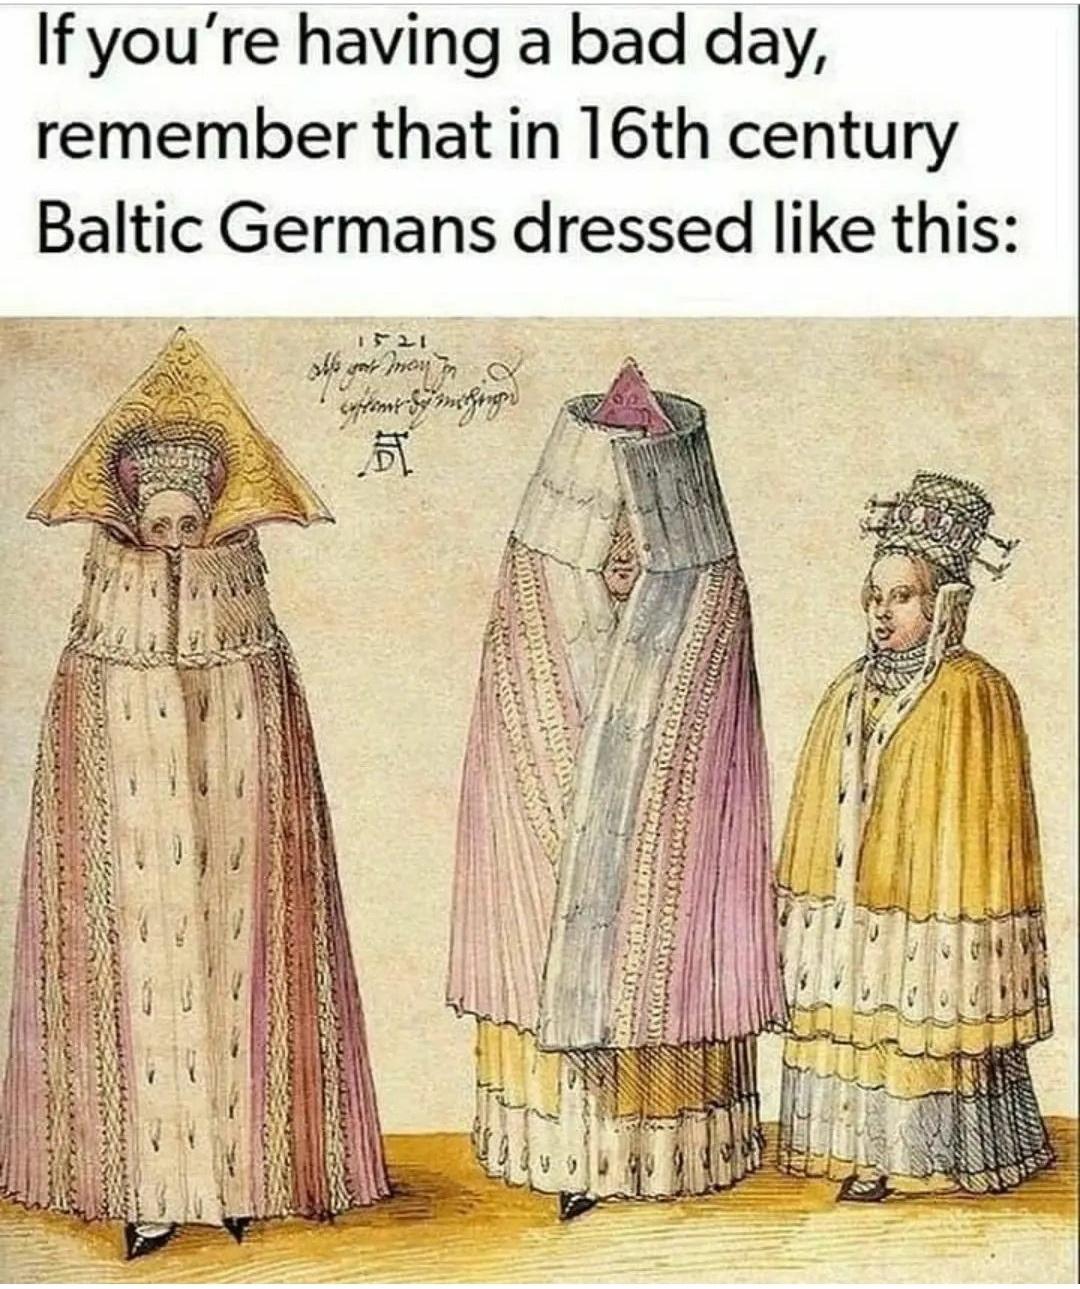 funny memes - fresh memes - 16th century baltic german dress - If you're having a bad day, remember that in 16th century Baltic Germans dressed this 1521 she was montant content of nehrogen ben